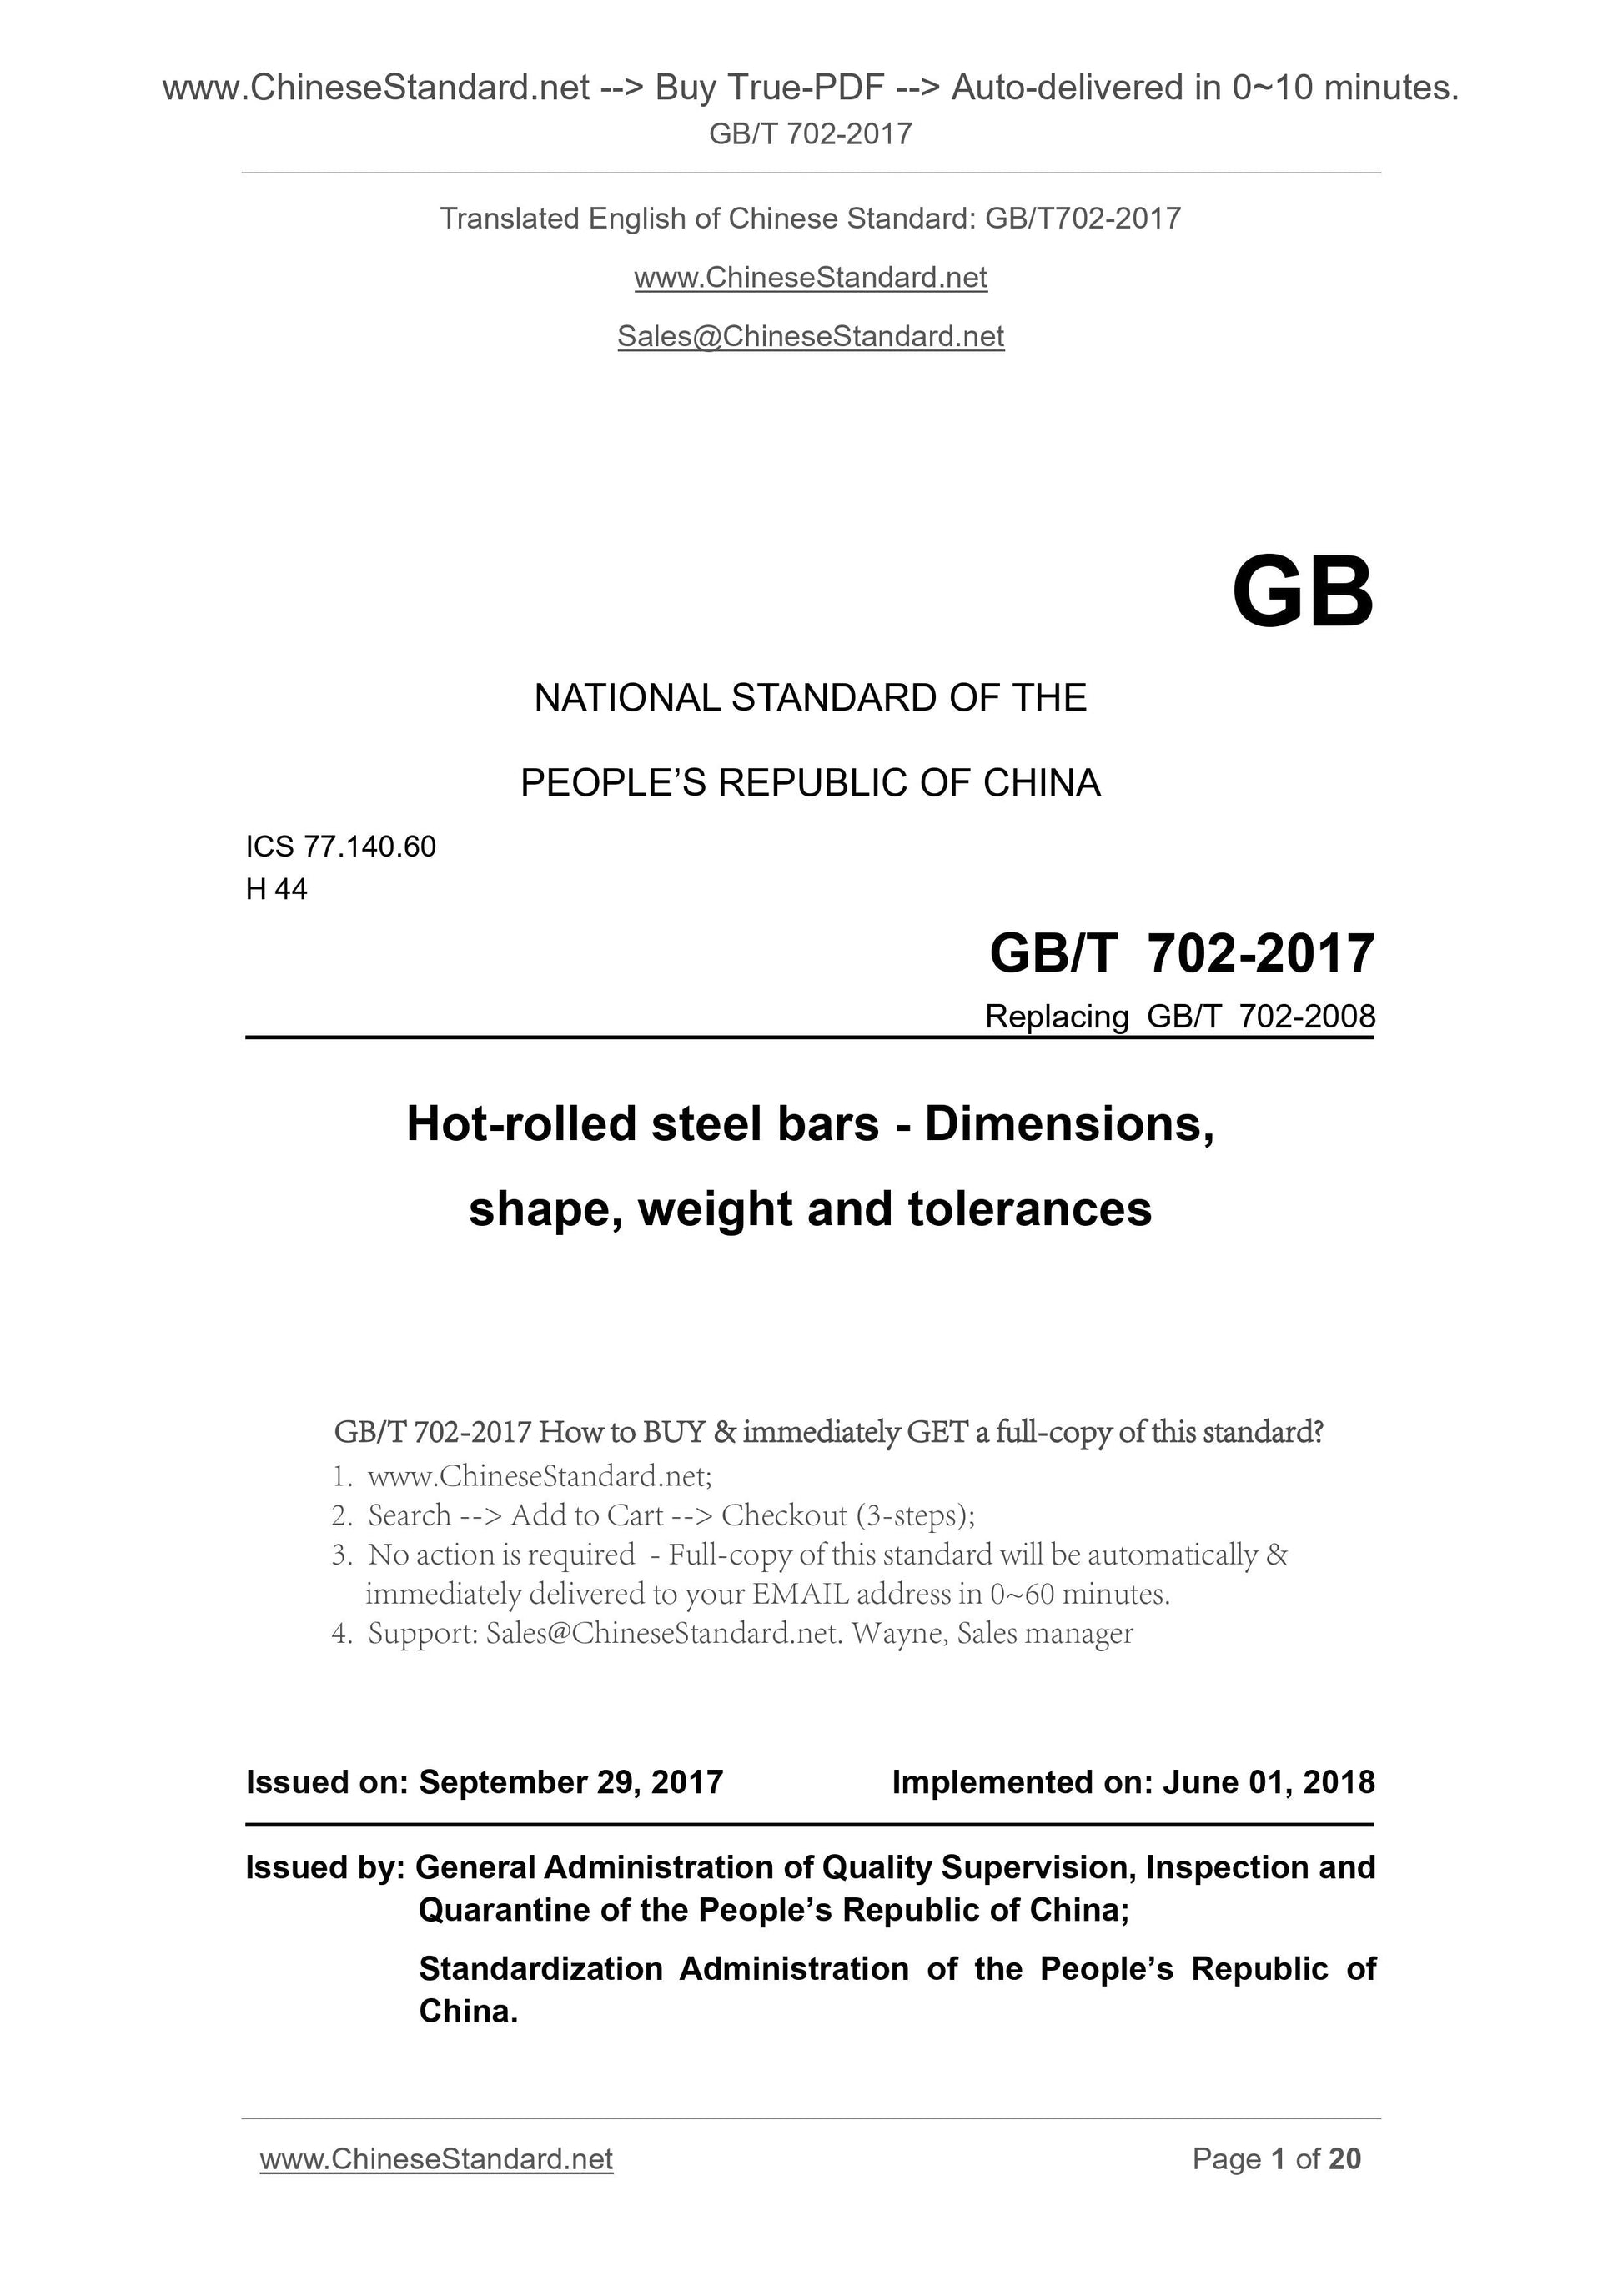 GB/T 702-2017 Page 1